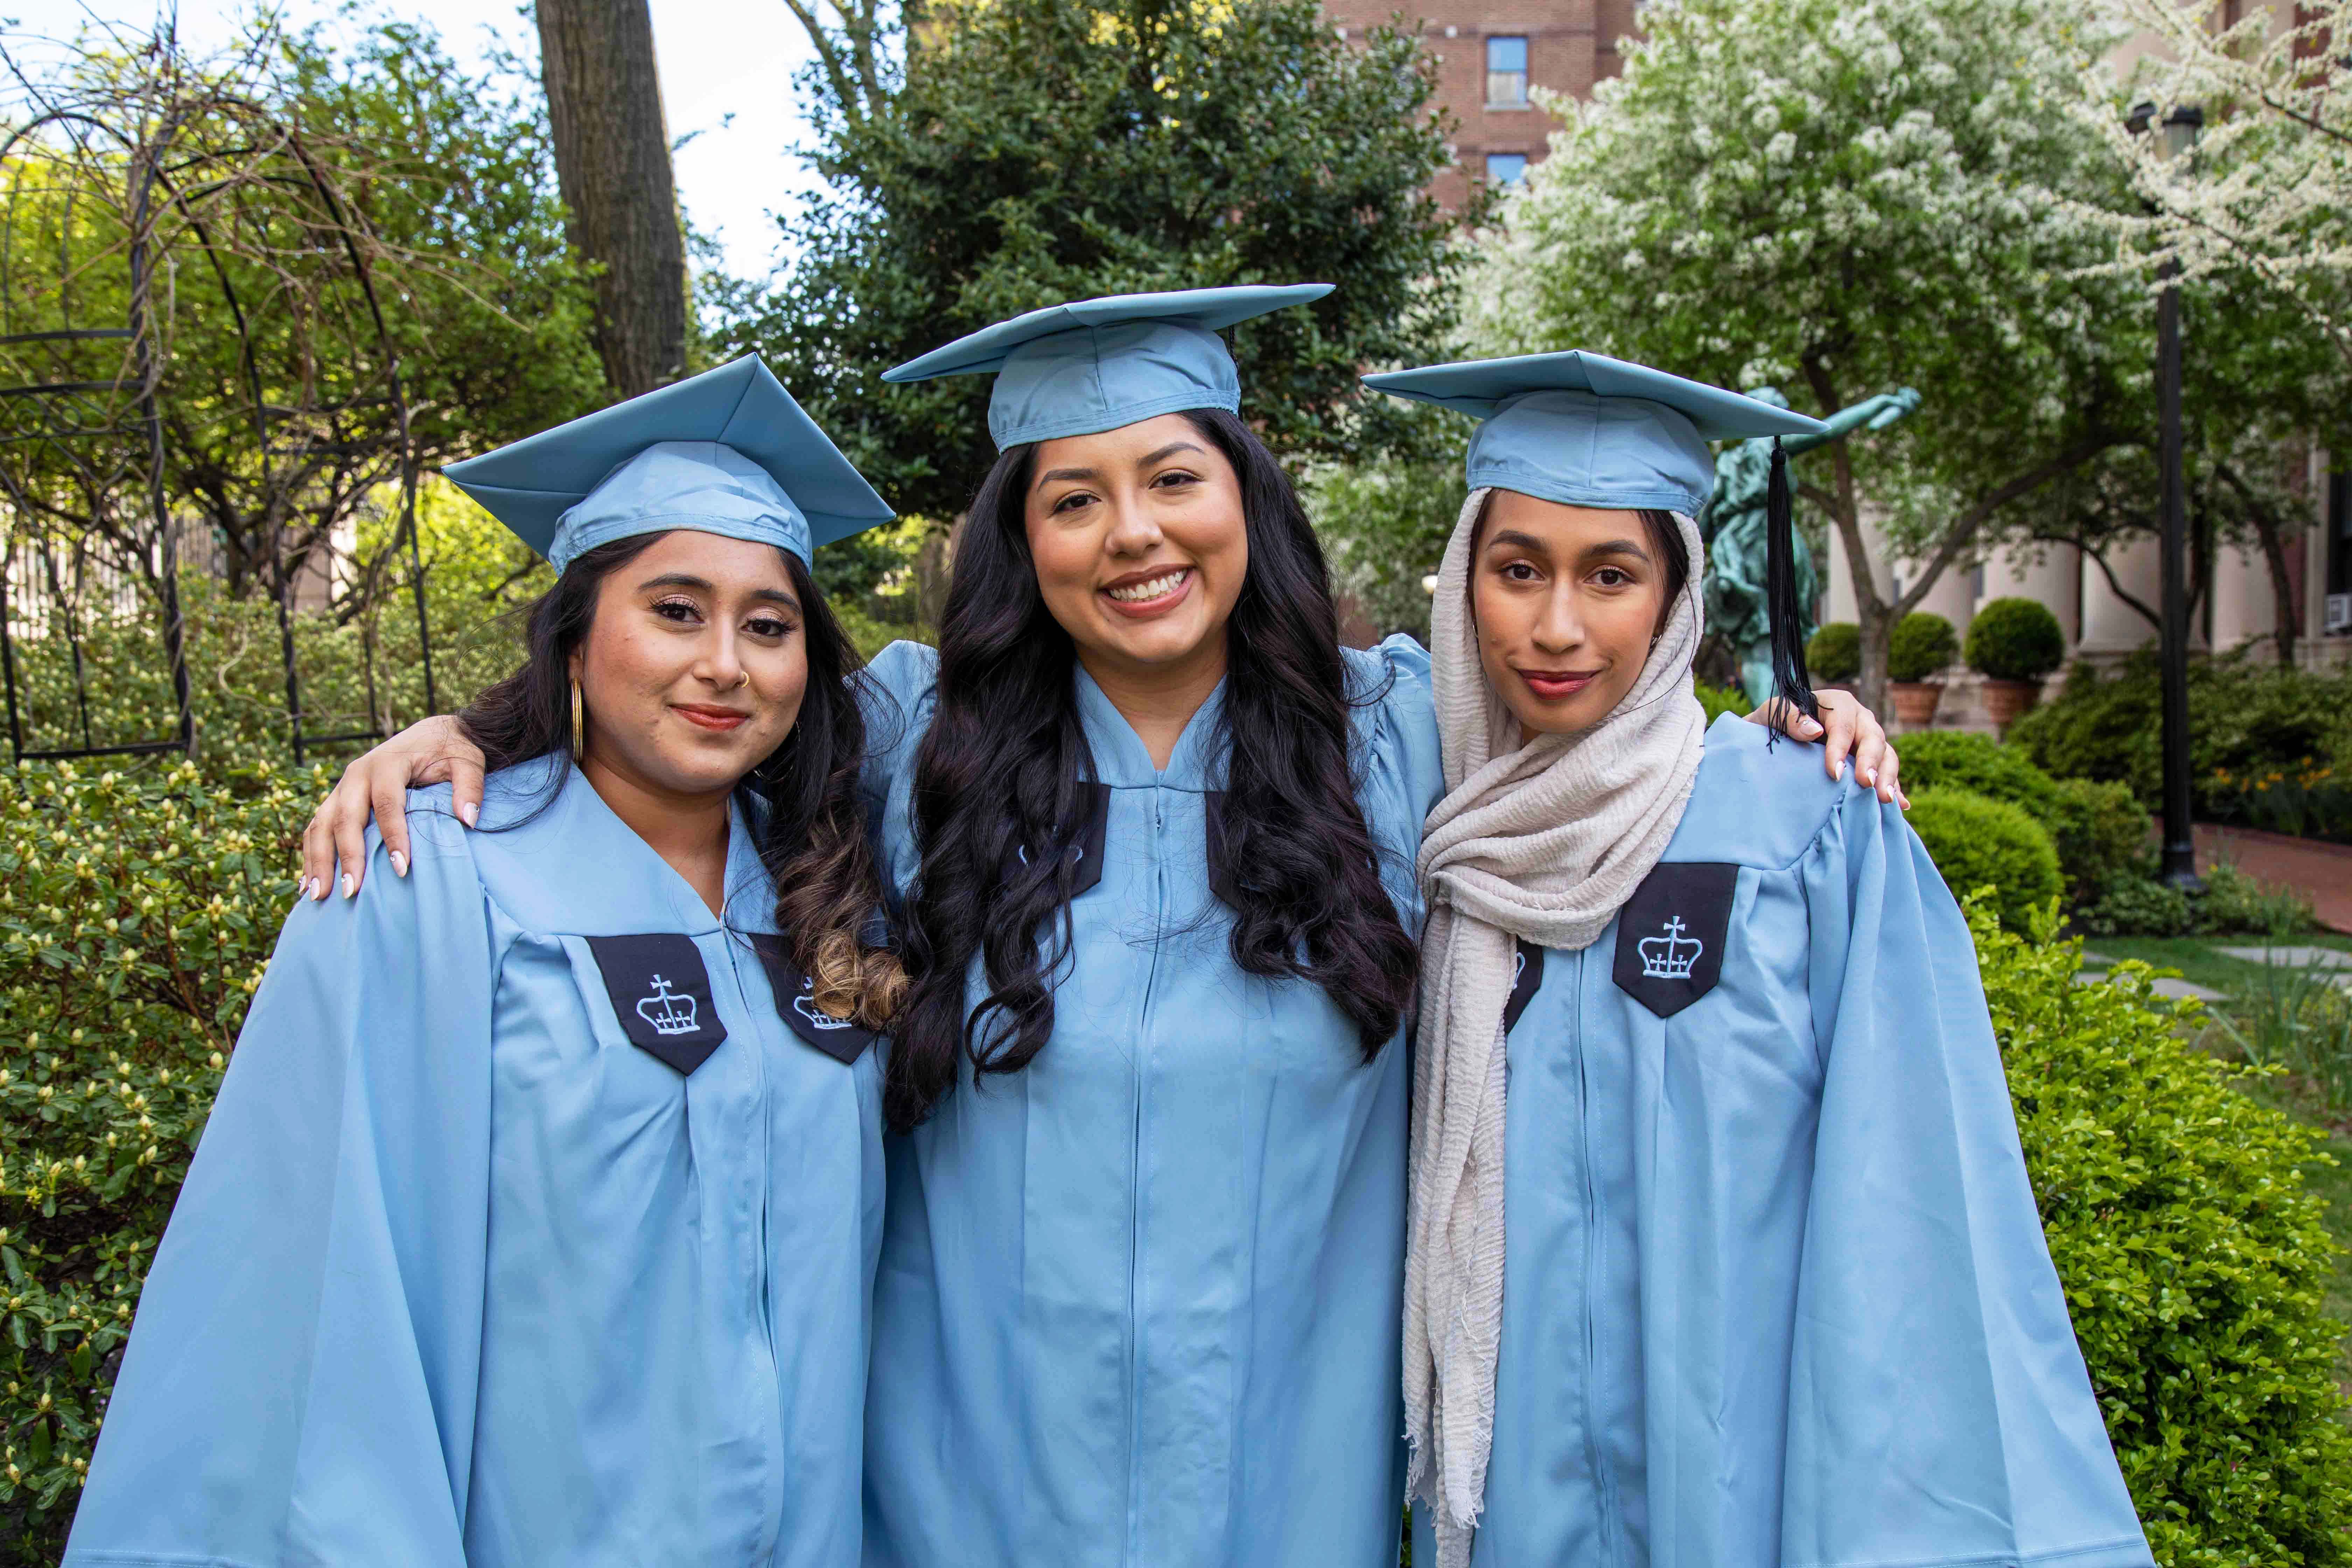  Samantha Bhuiyan ’22, Stephanie Secaira ’22, and Amana Mohiuddin ’22 pose together in their cap and gown ensembles.